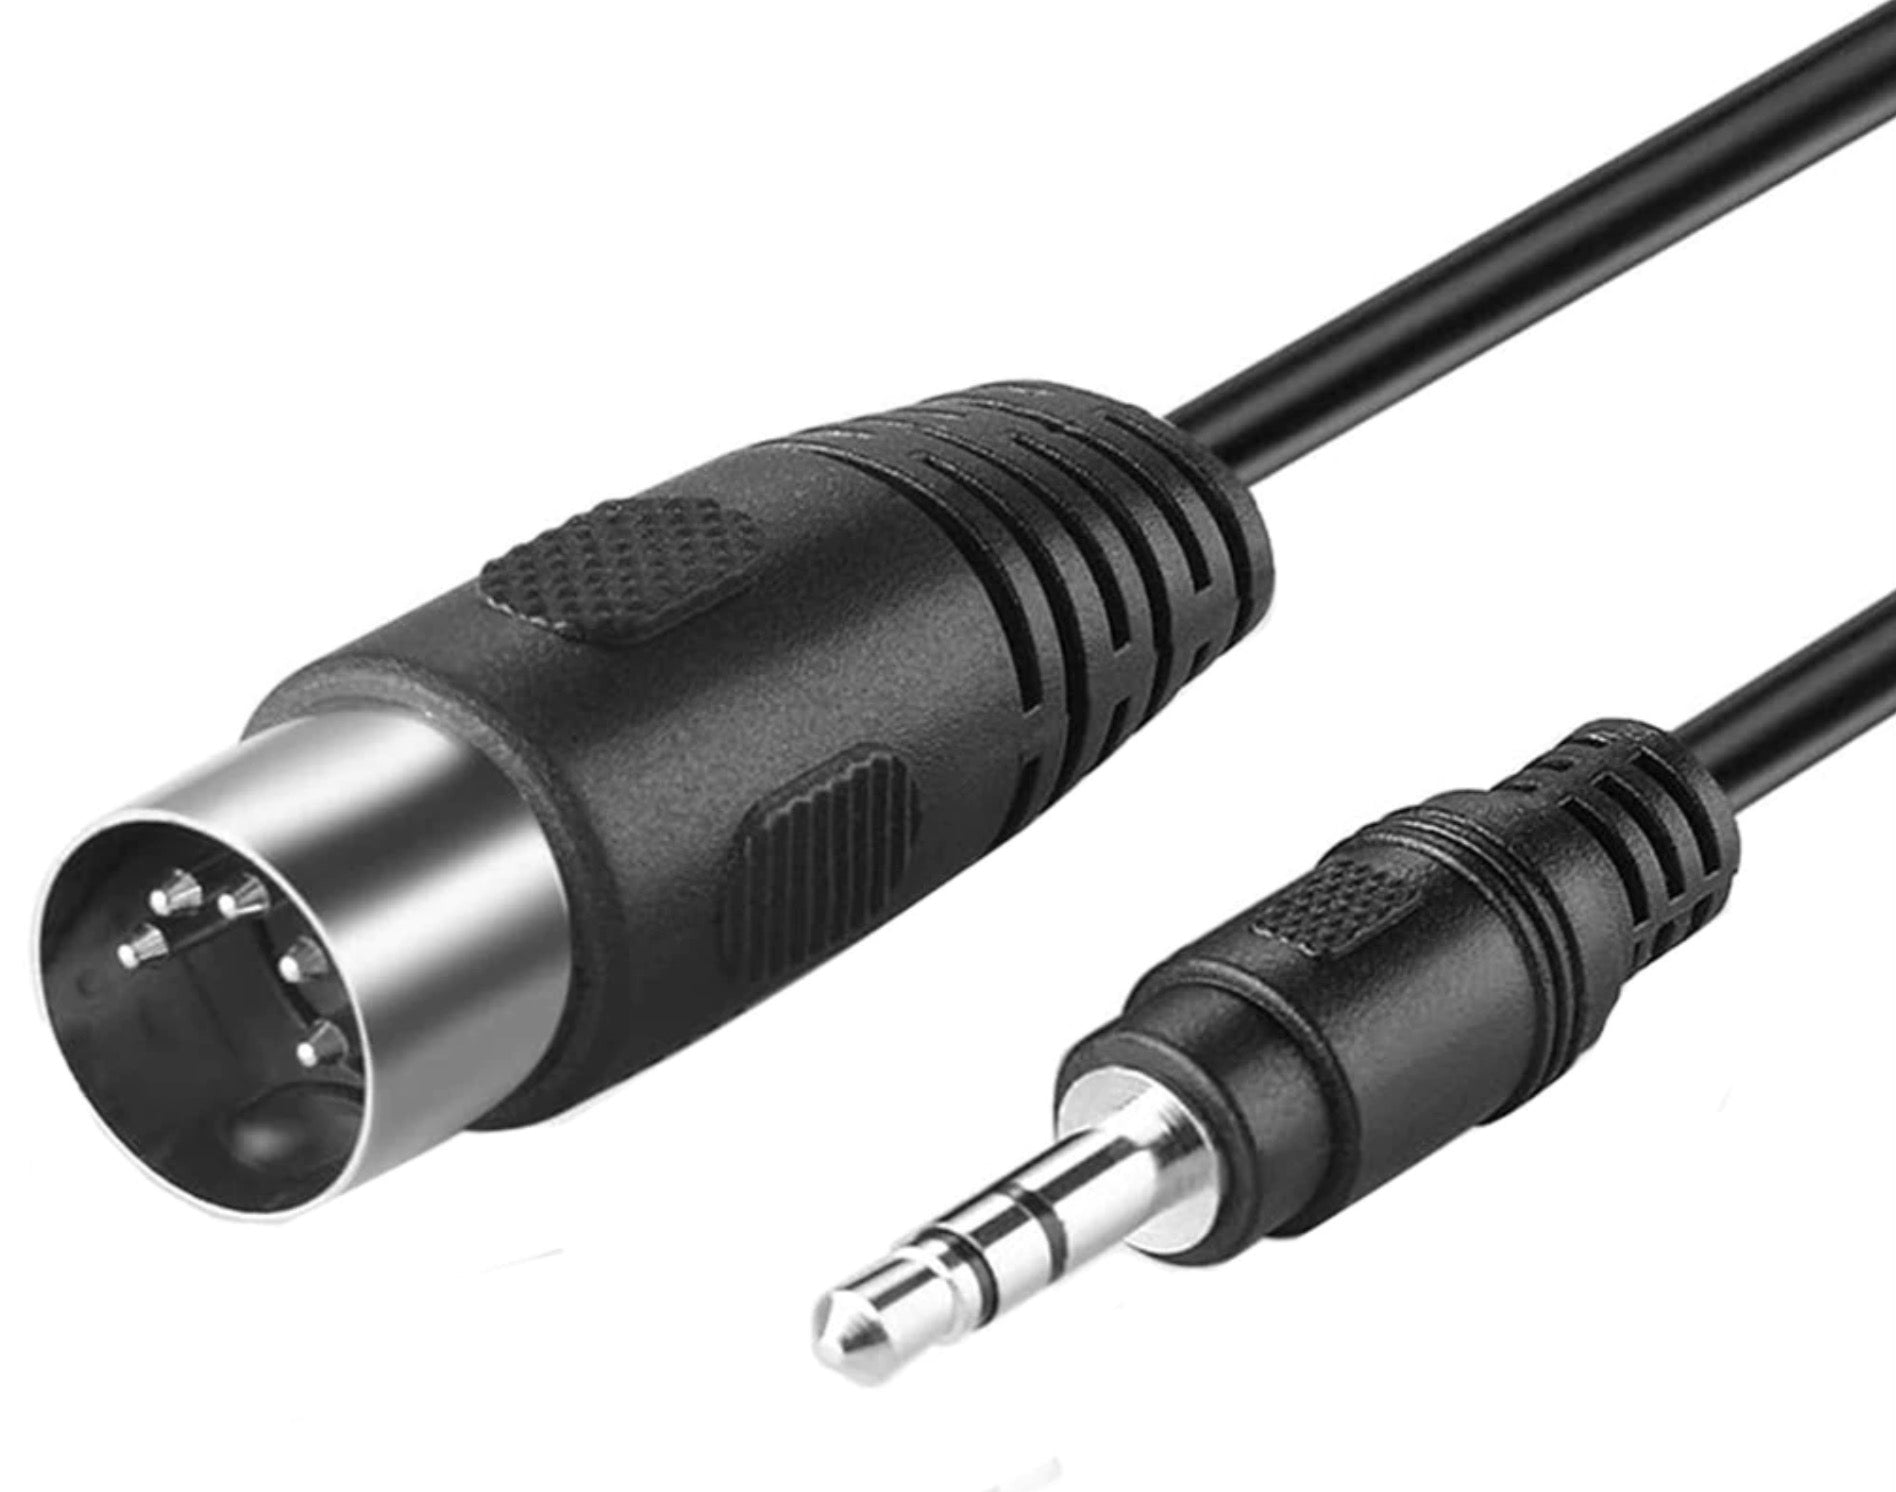 5-Pin Din Male to 3.5mm AUX TRS Audio Cable